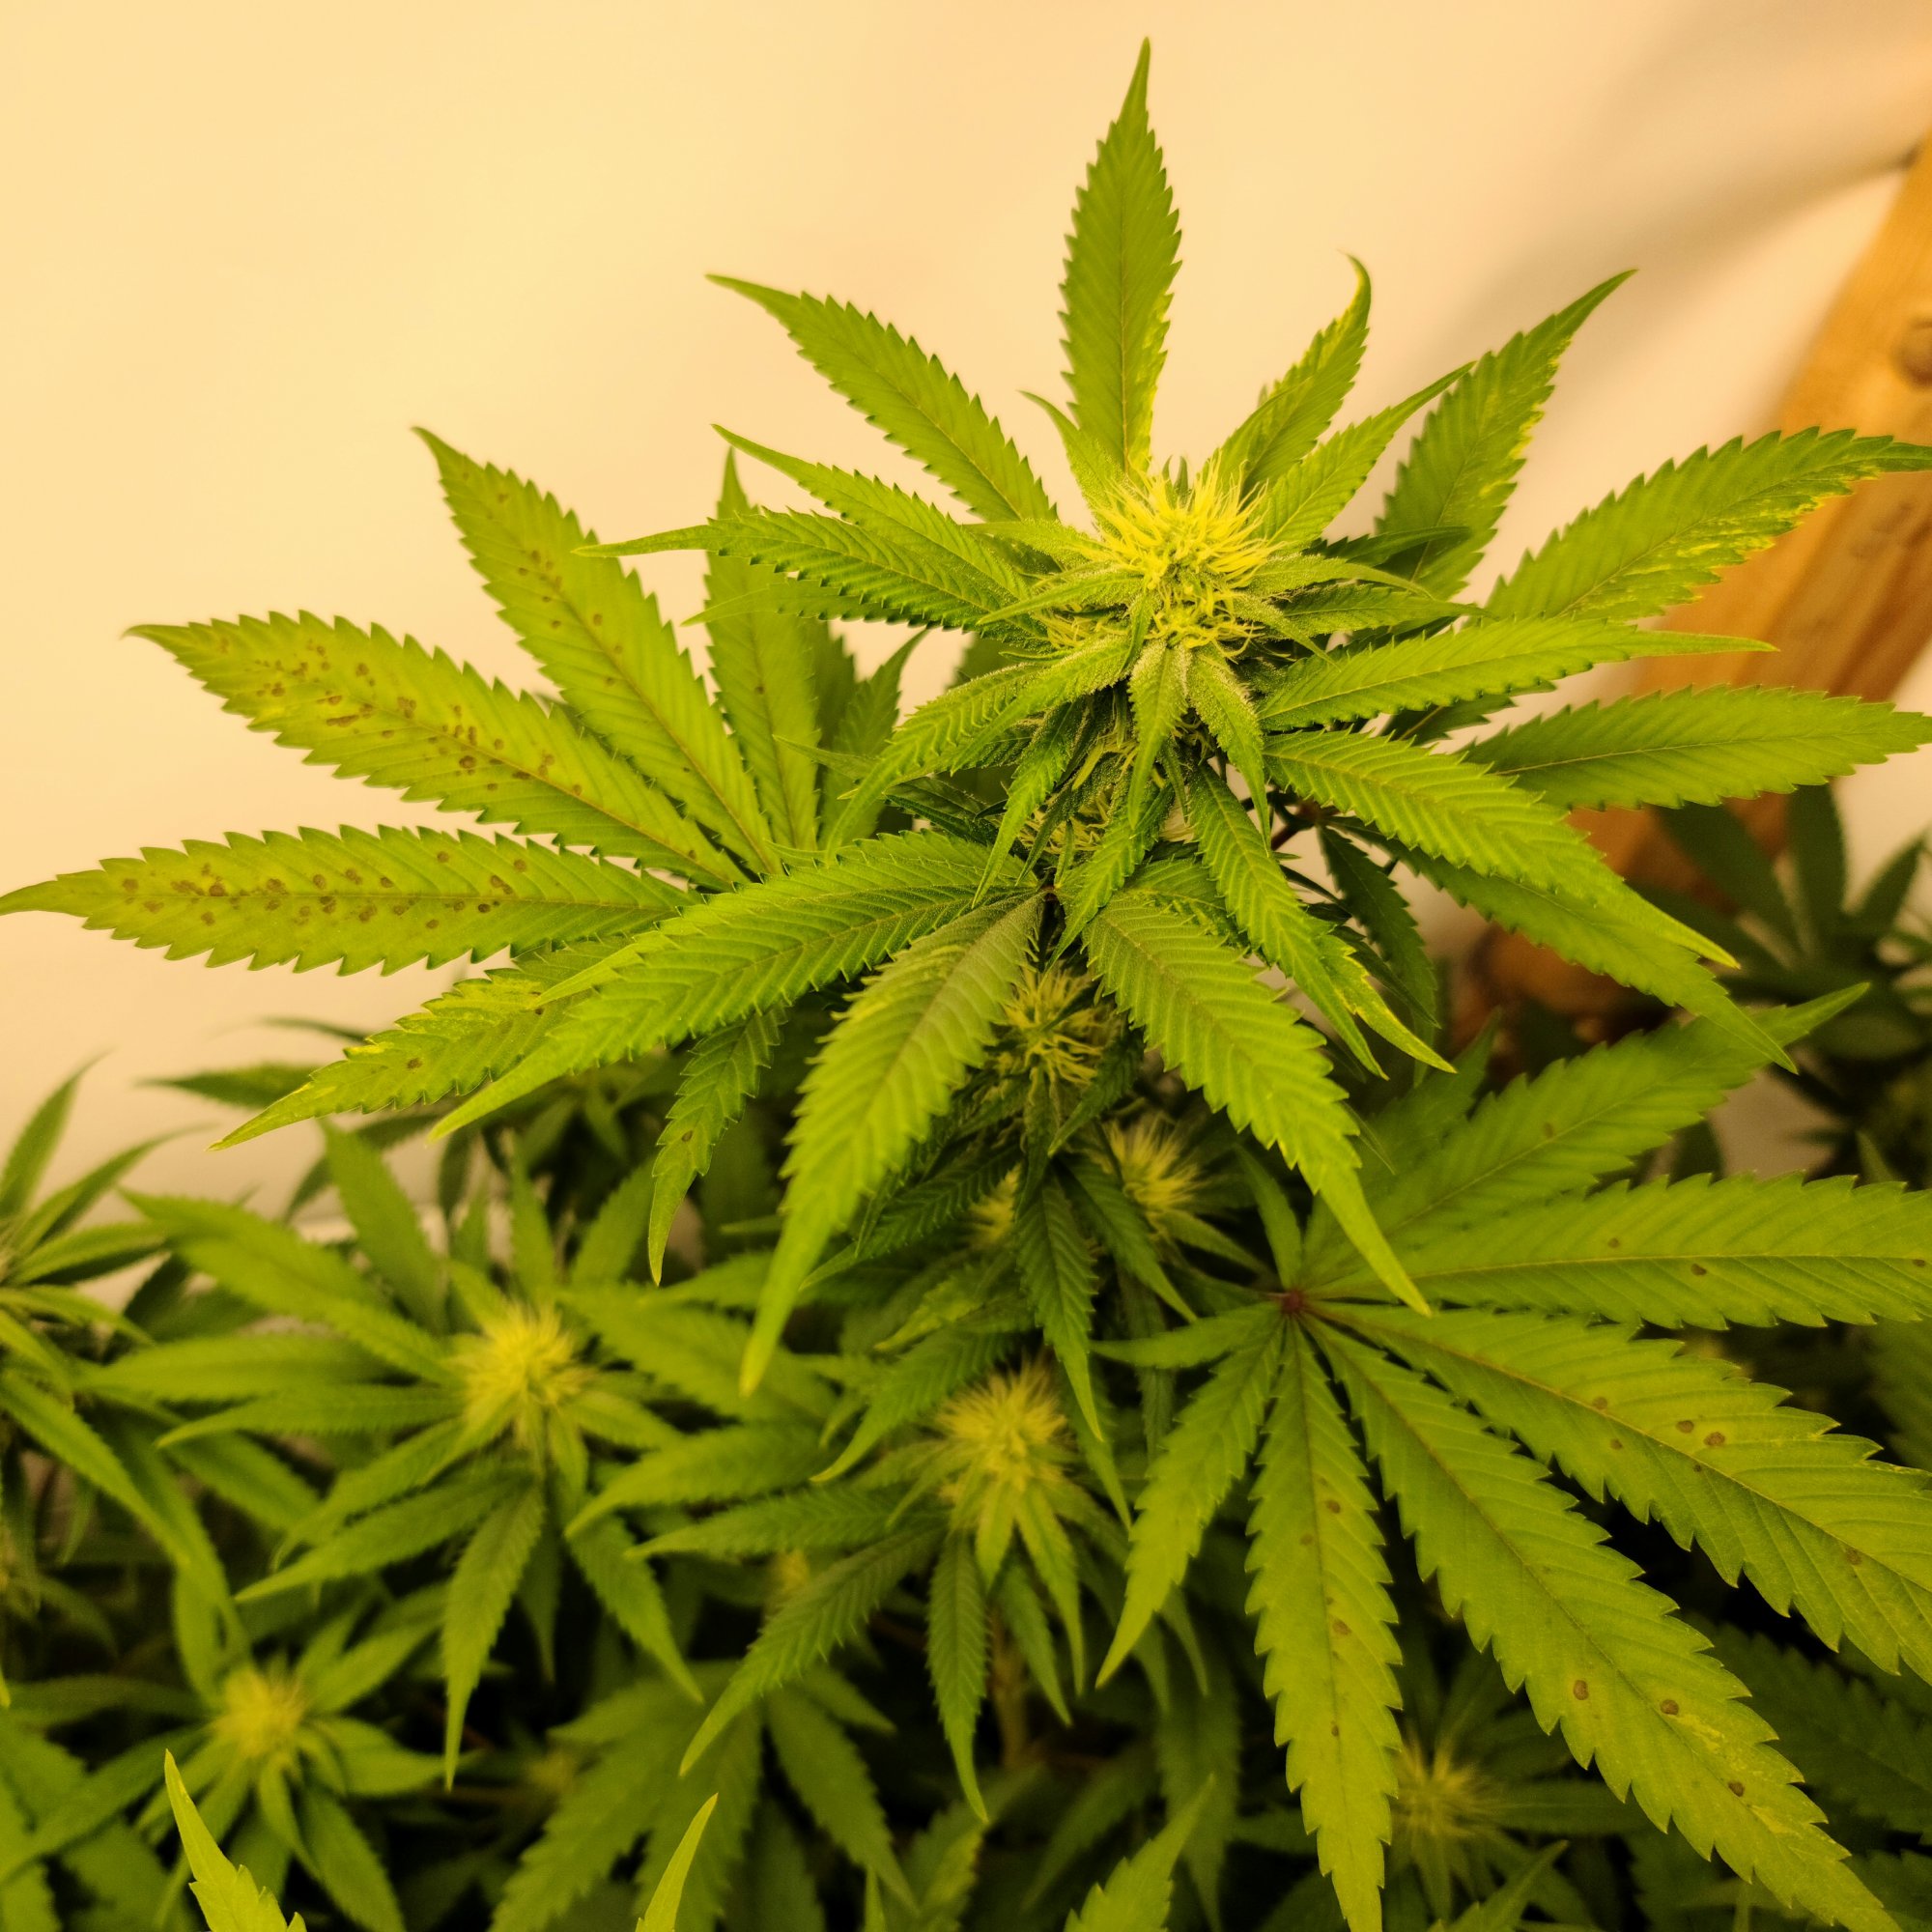 Need opinions on plant issues